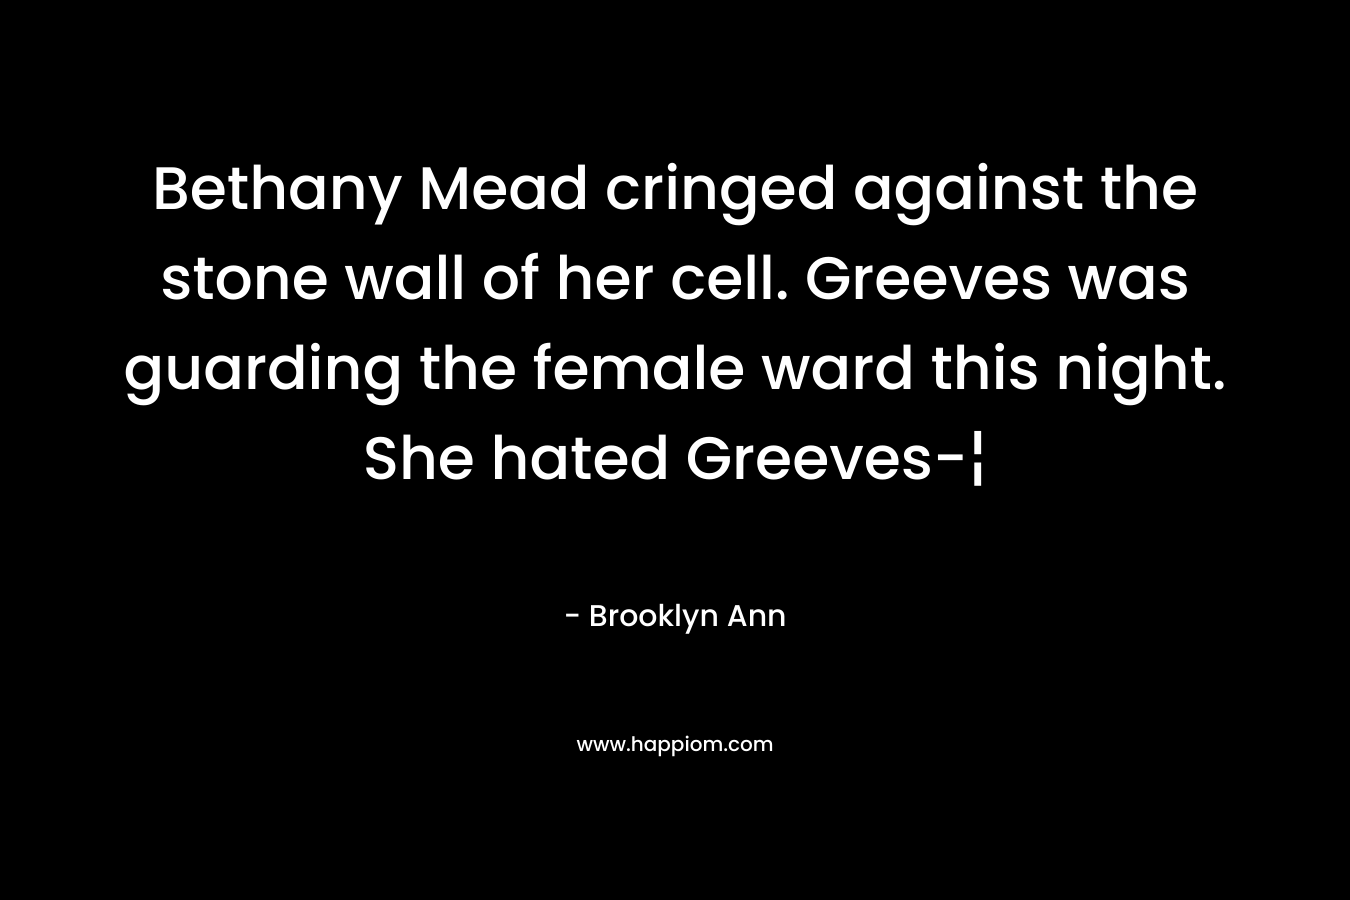 Bethany Mead cringed against the stone wall of her cell. Greeves was guarding the female ward this night. She hated Greeves-¦